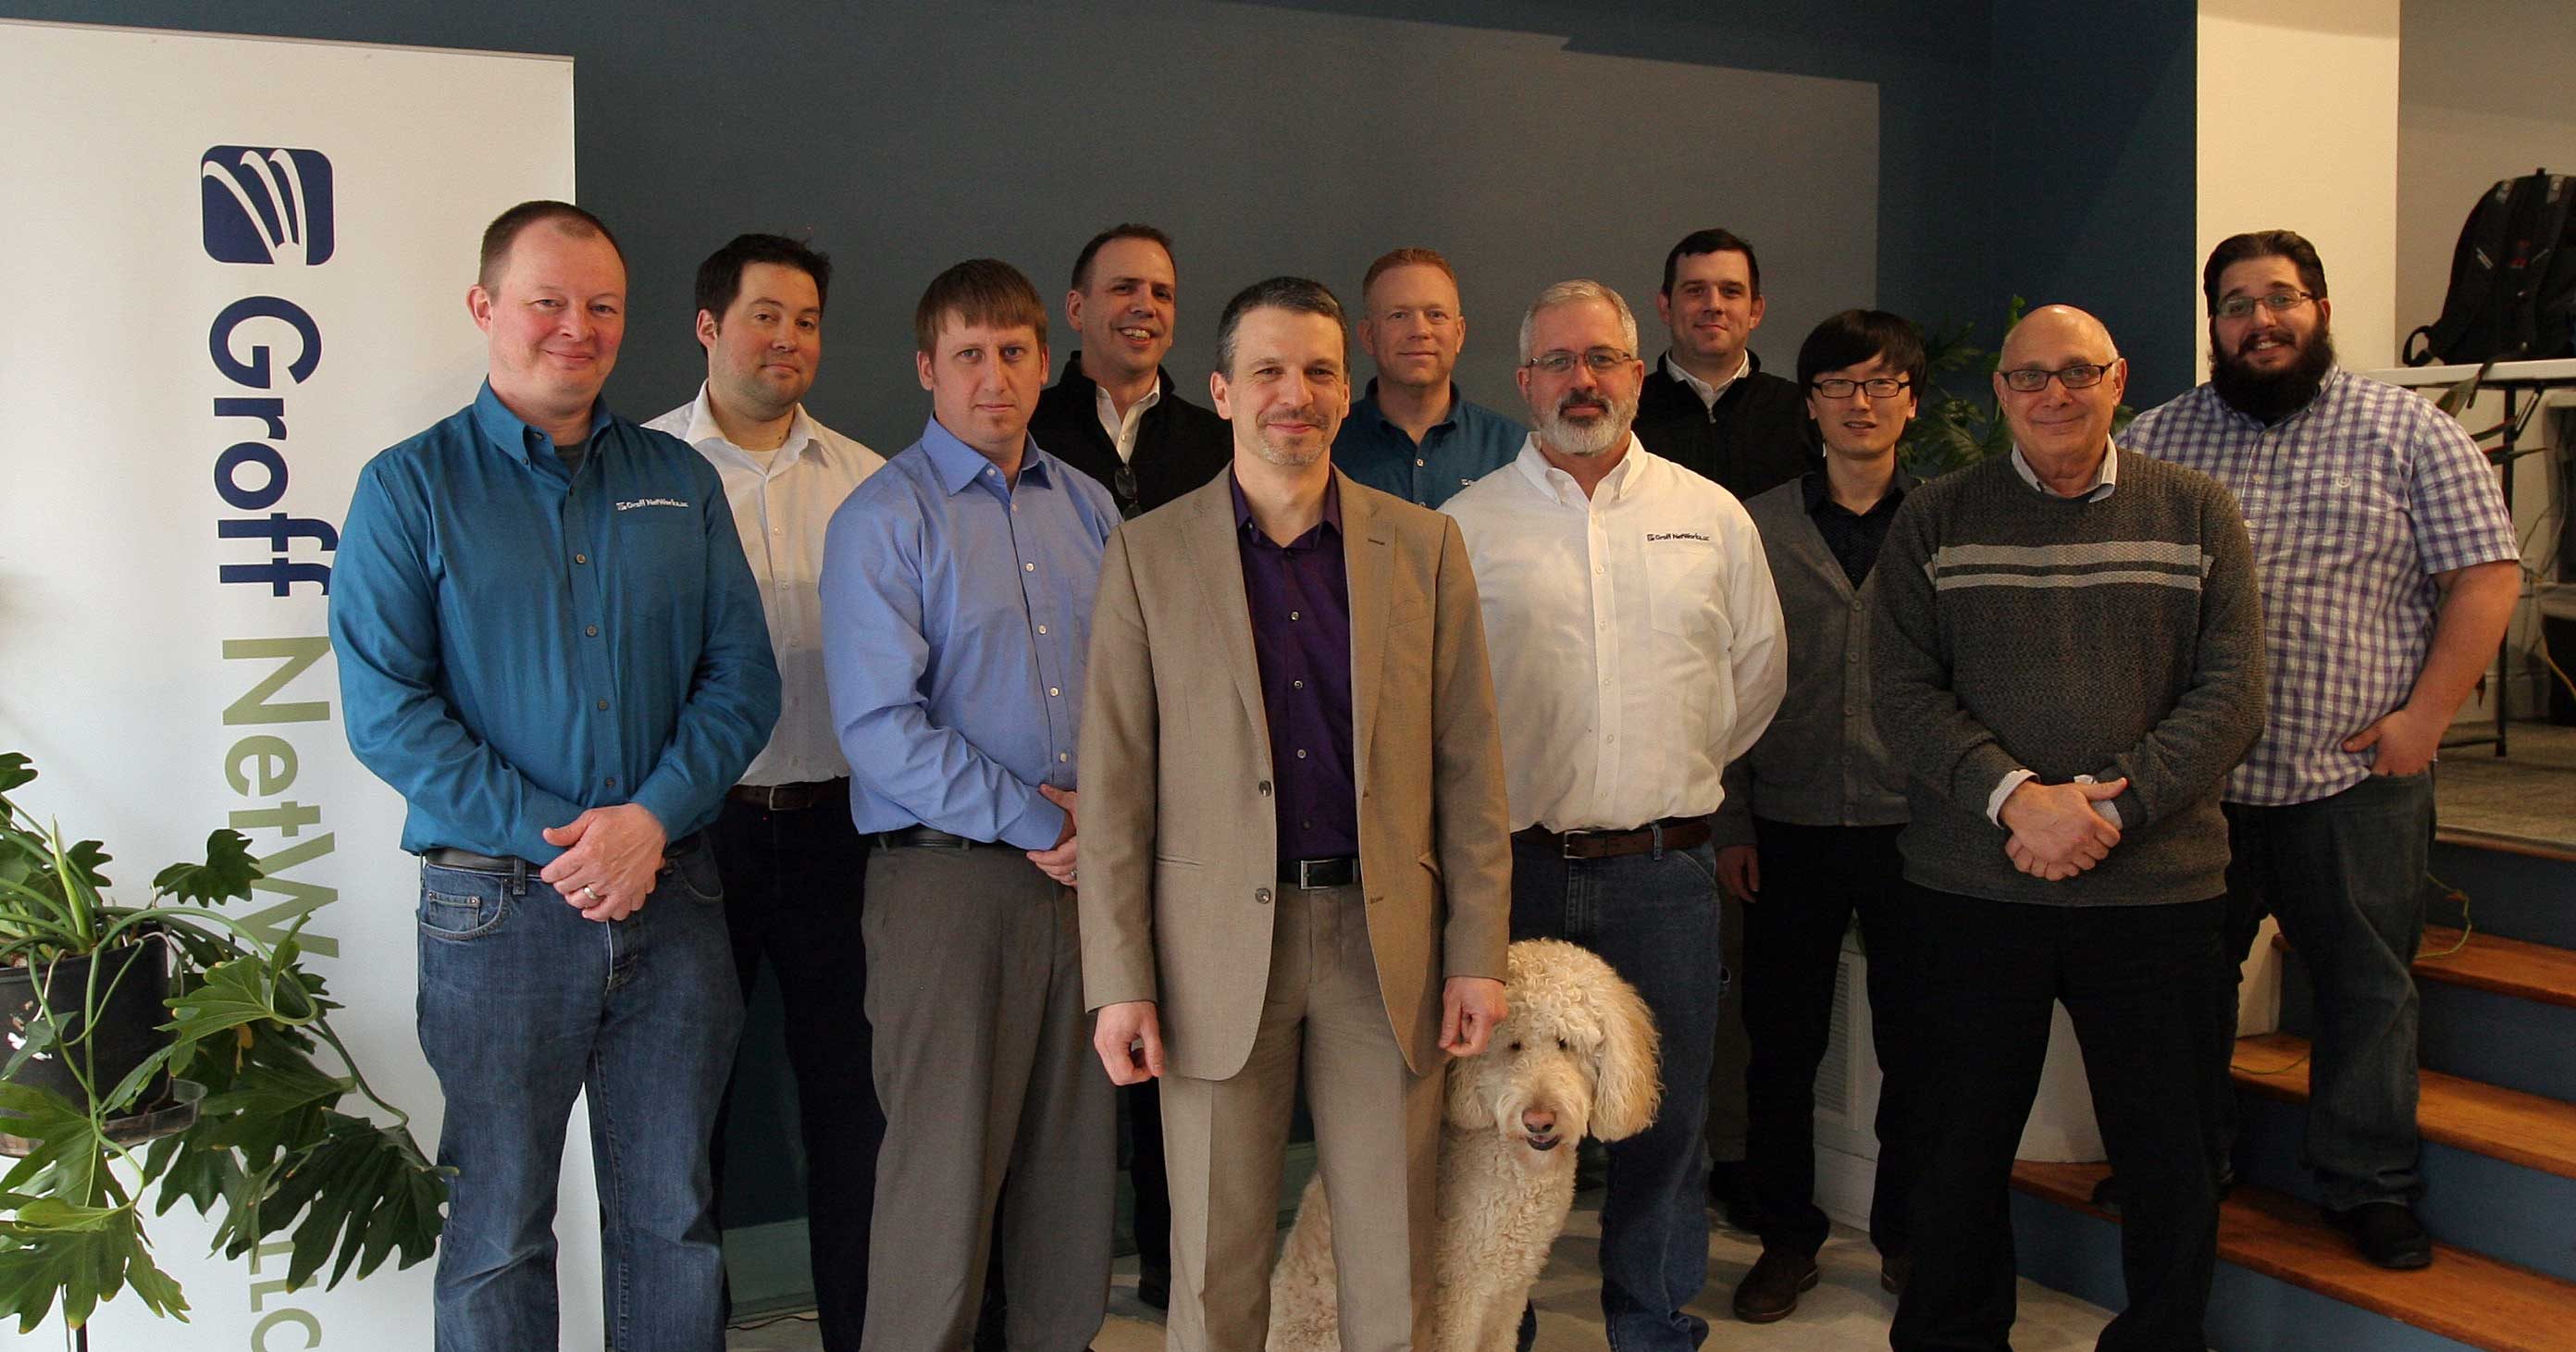 The team at Groff Networks